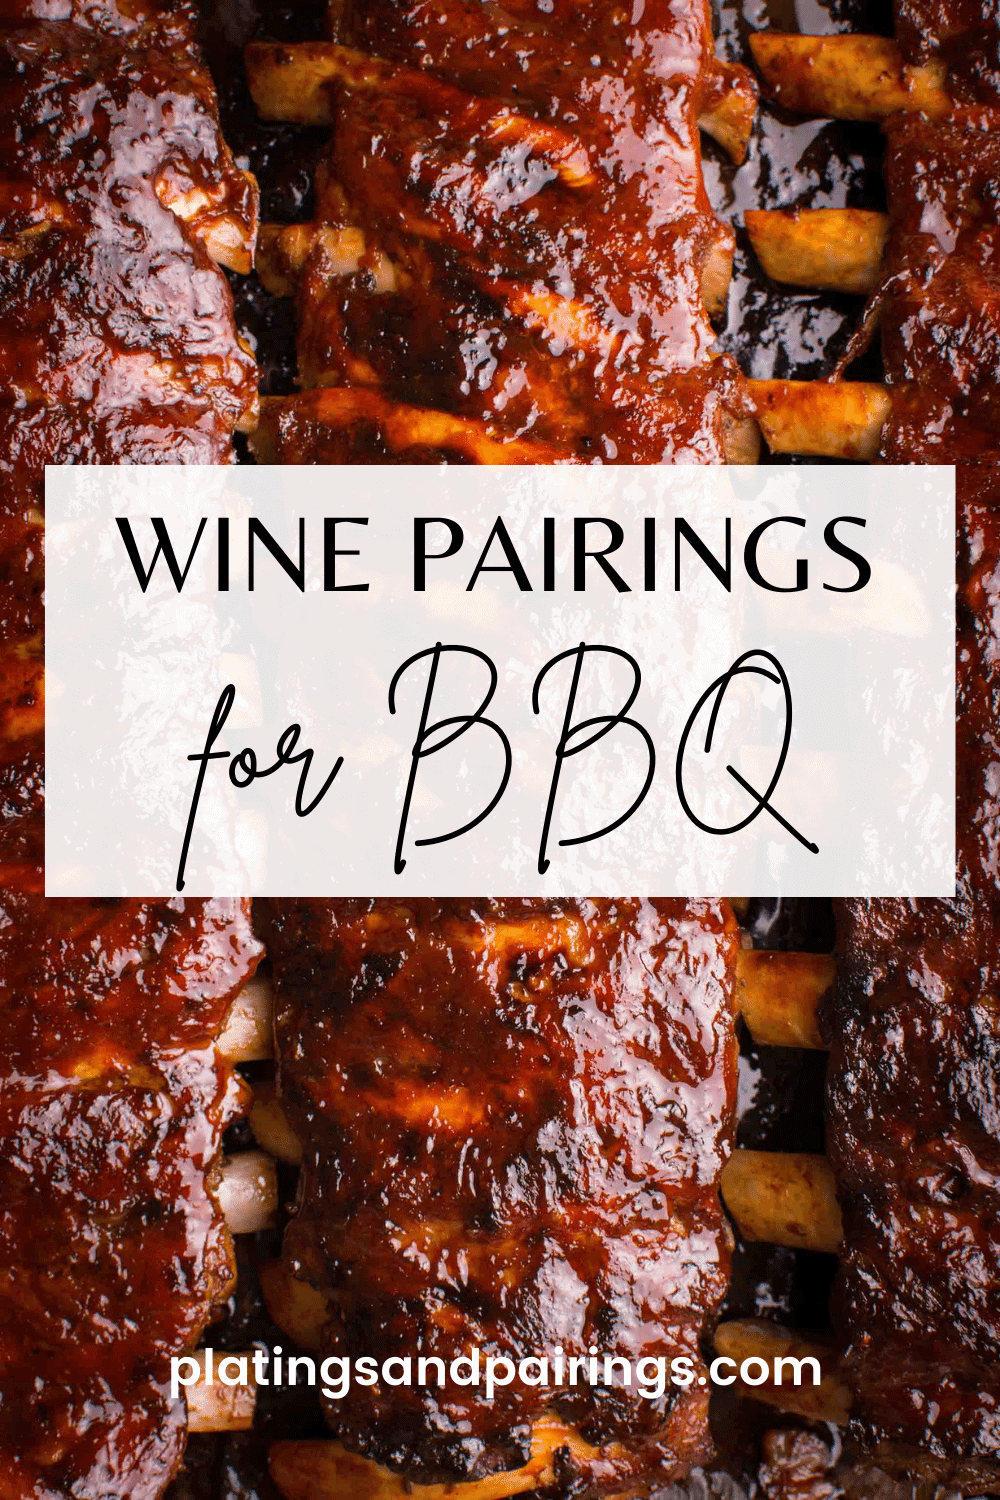 Wine pairings for BBQ text on picture of cooked BBQ ribs.